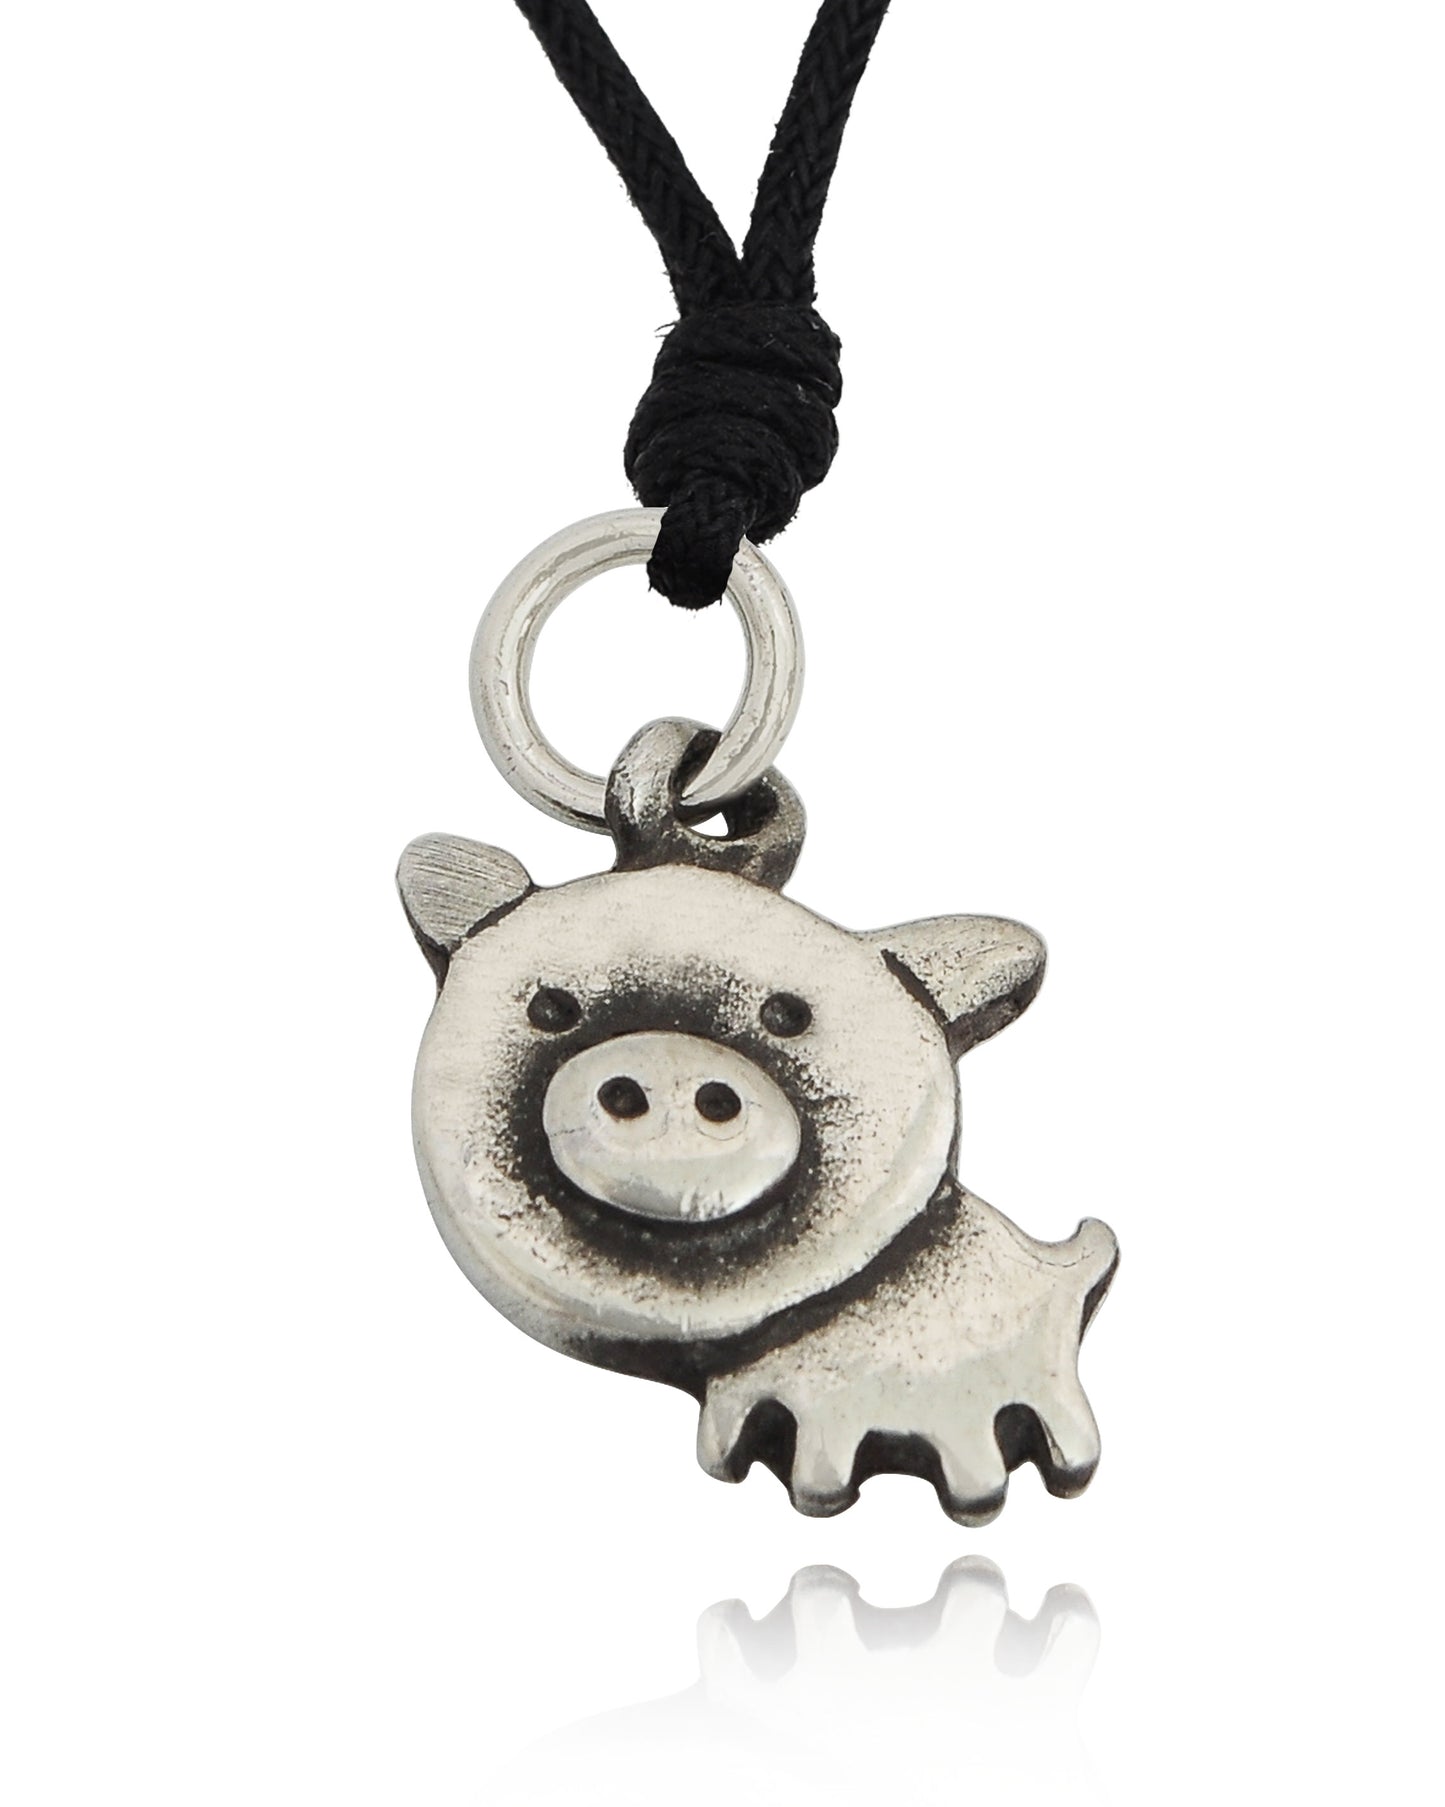 Chubby Pig Silver Pewter Charm Necklace Pendant Jewelry With Cotton Cord